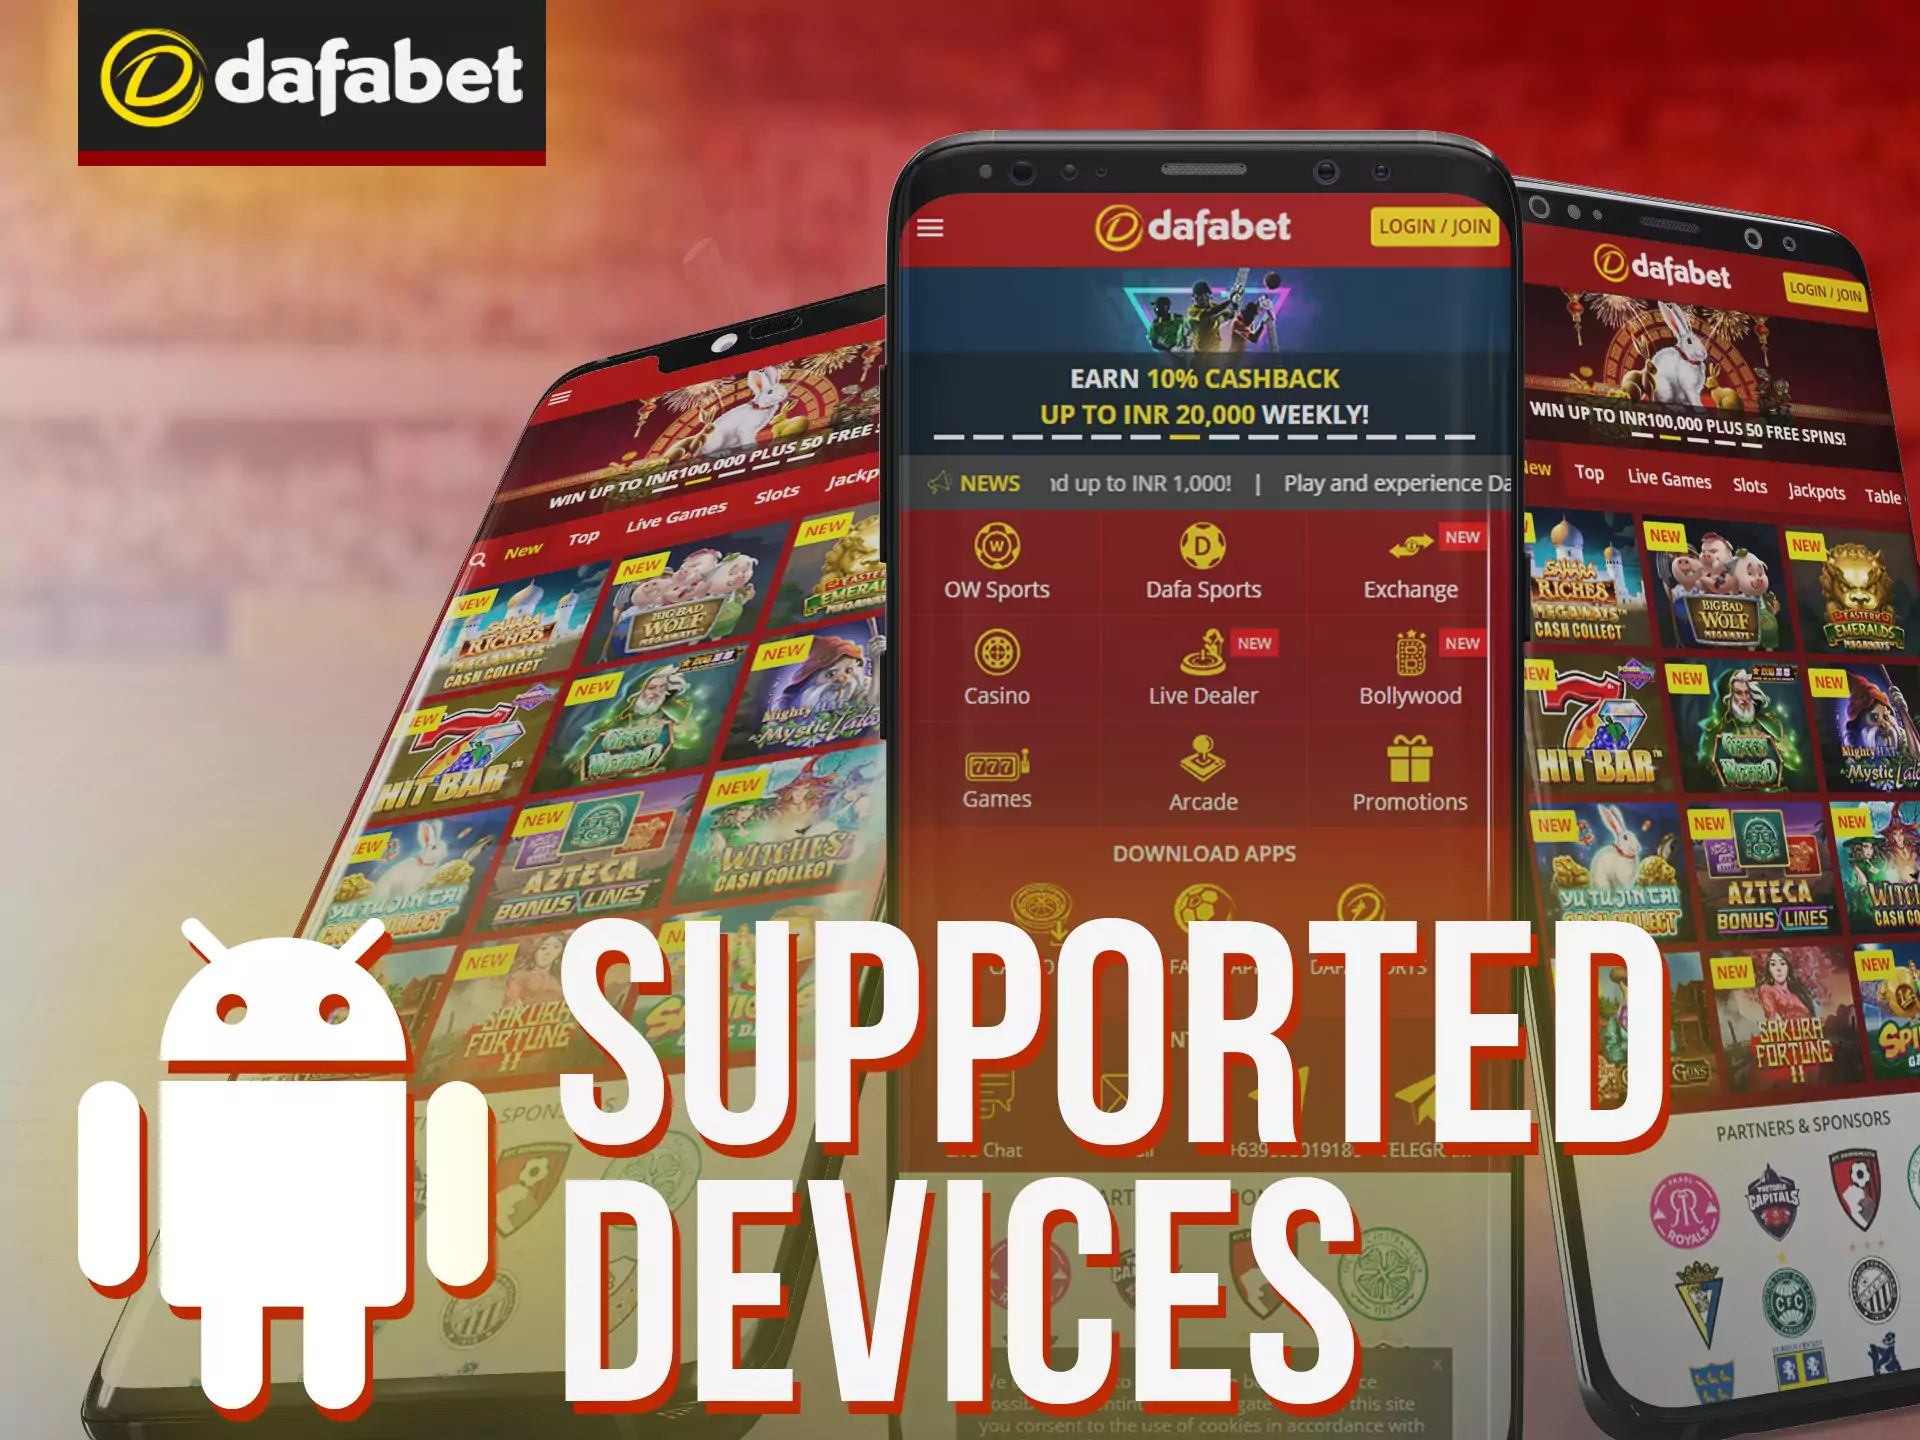 Dafabet Android app can be installed on any Android device.